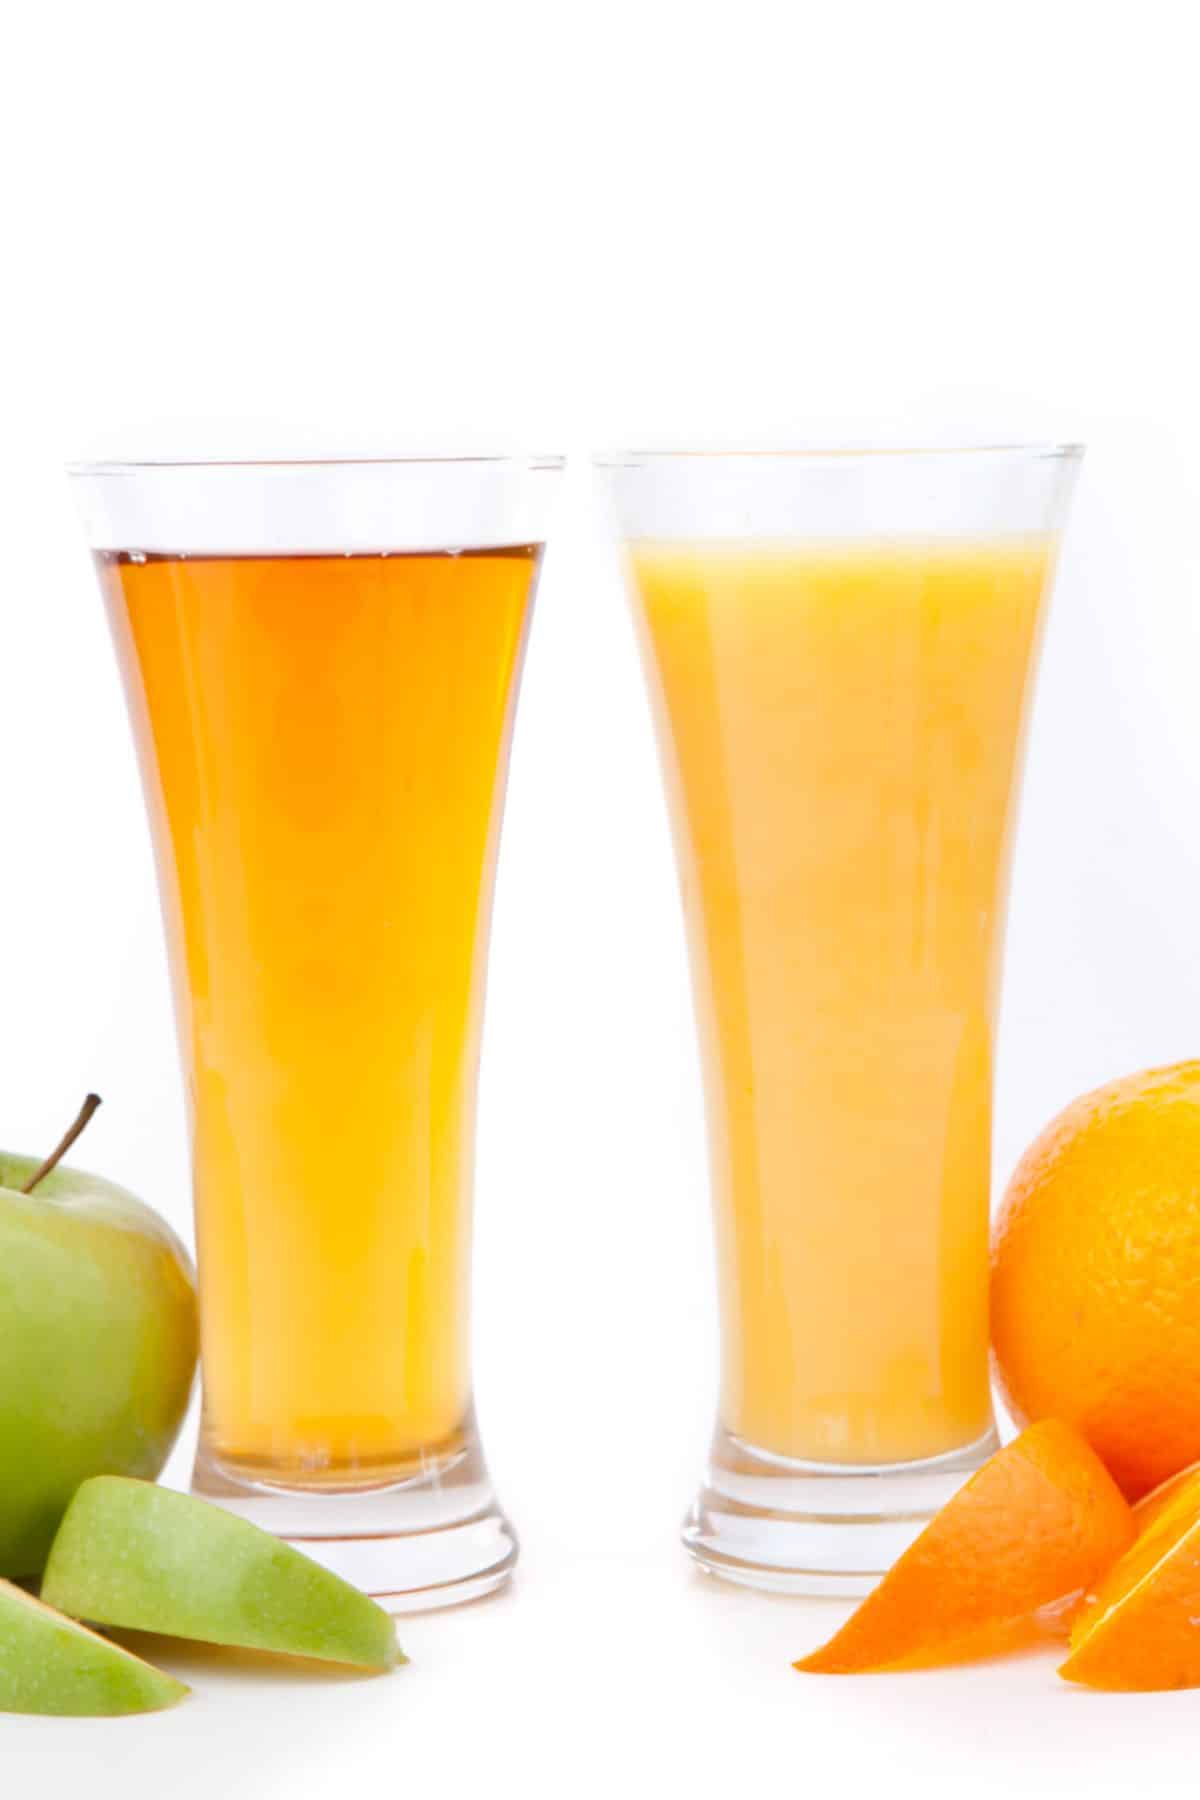 Two tall glasses, one of orange juice and one of apple juice.